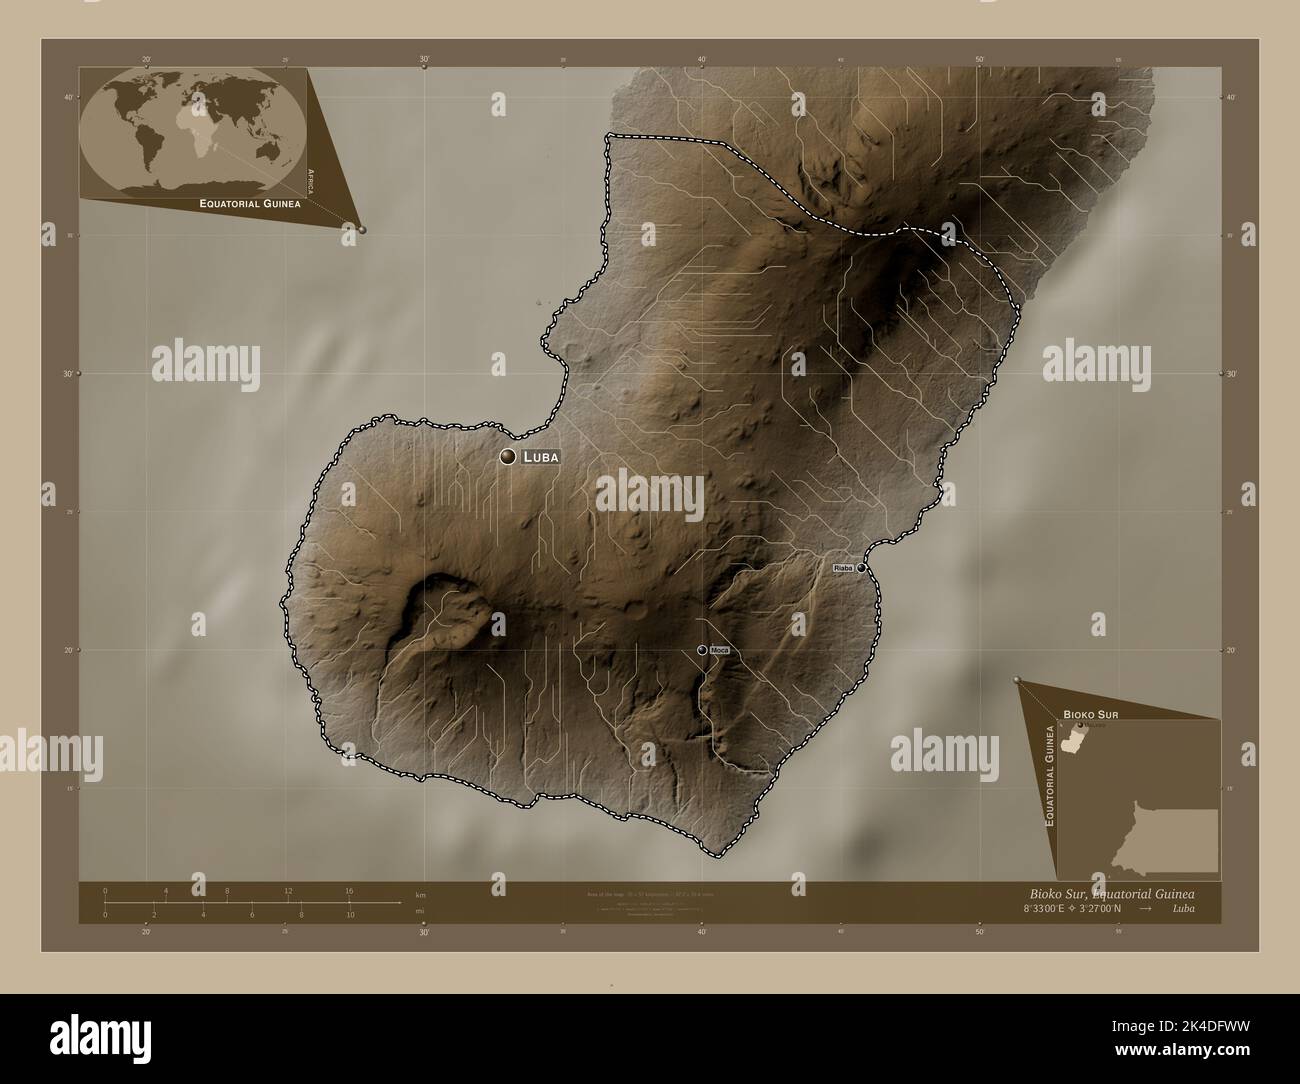 Bioko Sur, province of Equatorial Guinea. Elevation map colored in sepia tones with lakes and rivers. Locations and names of major cities of the regio Stock Photo